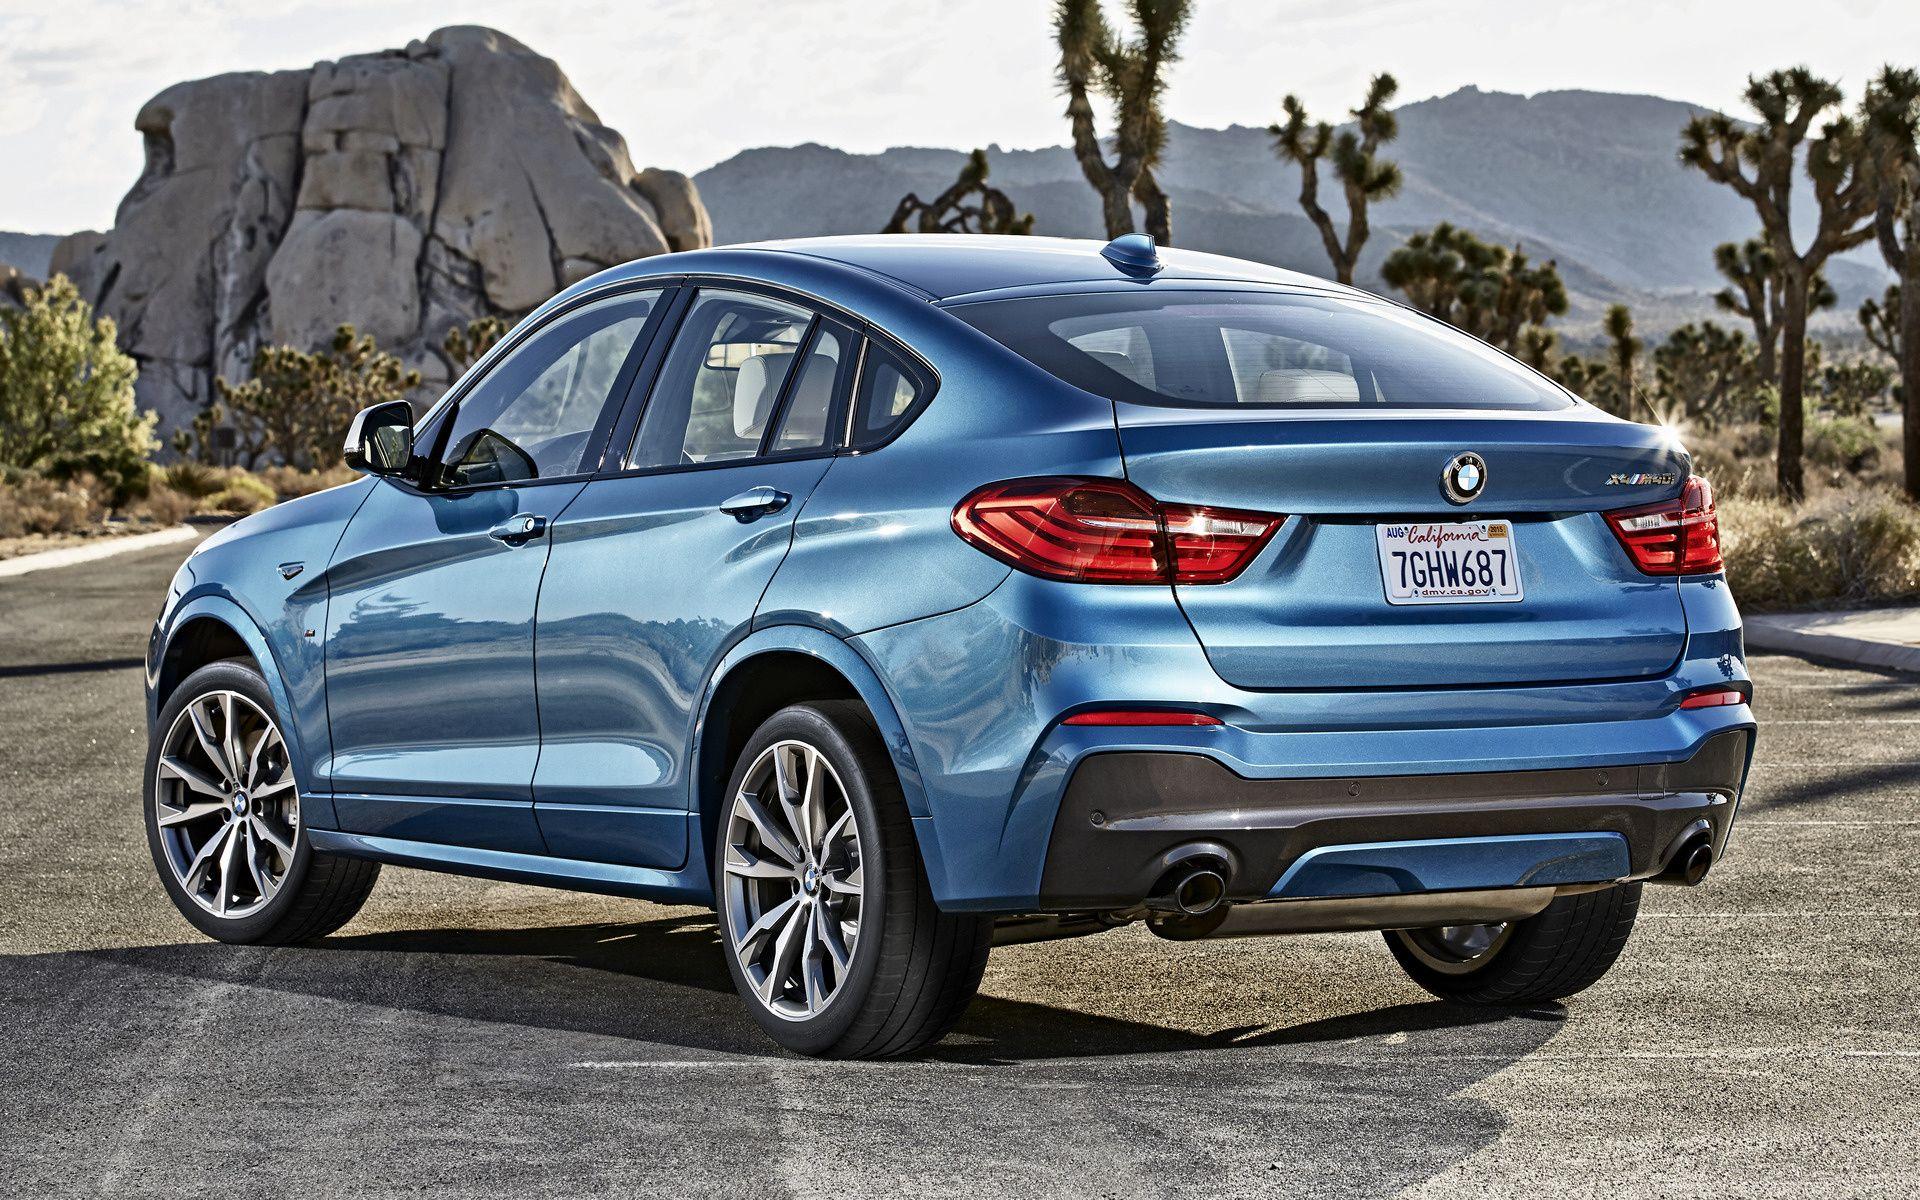 BMW X4 M40i (2015) Wallpaper and HD Image